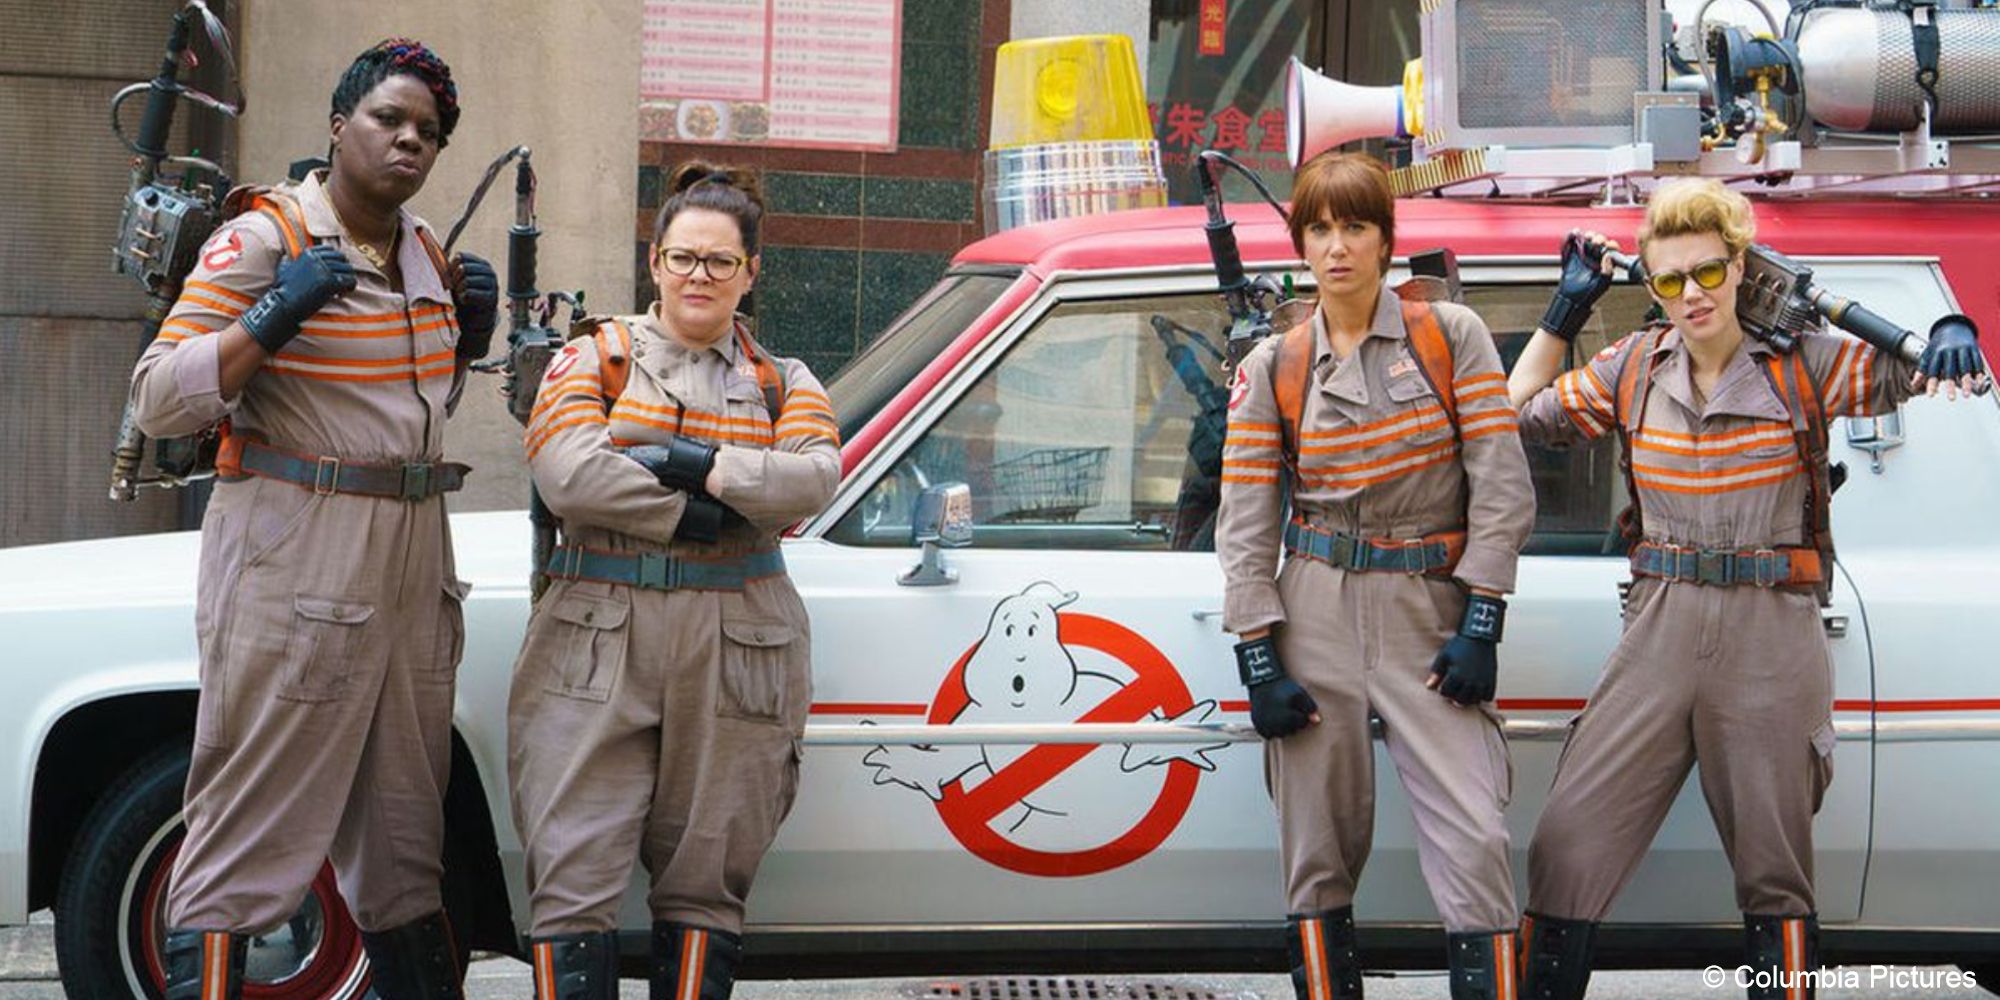 Ghostbusters_Patty Abby Erin and Jillian stand in front of Ecto-1 in ghostbusting gear